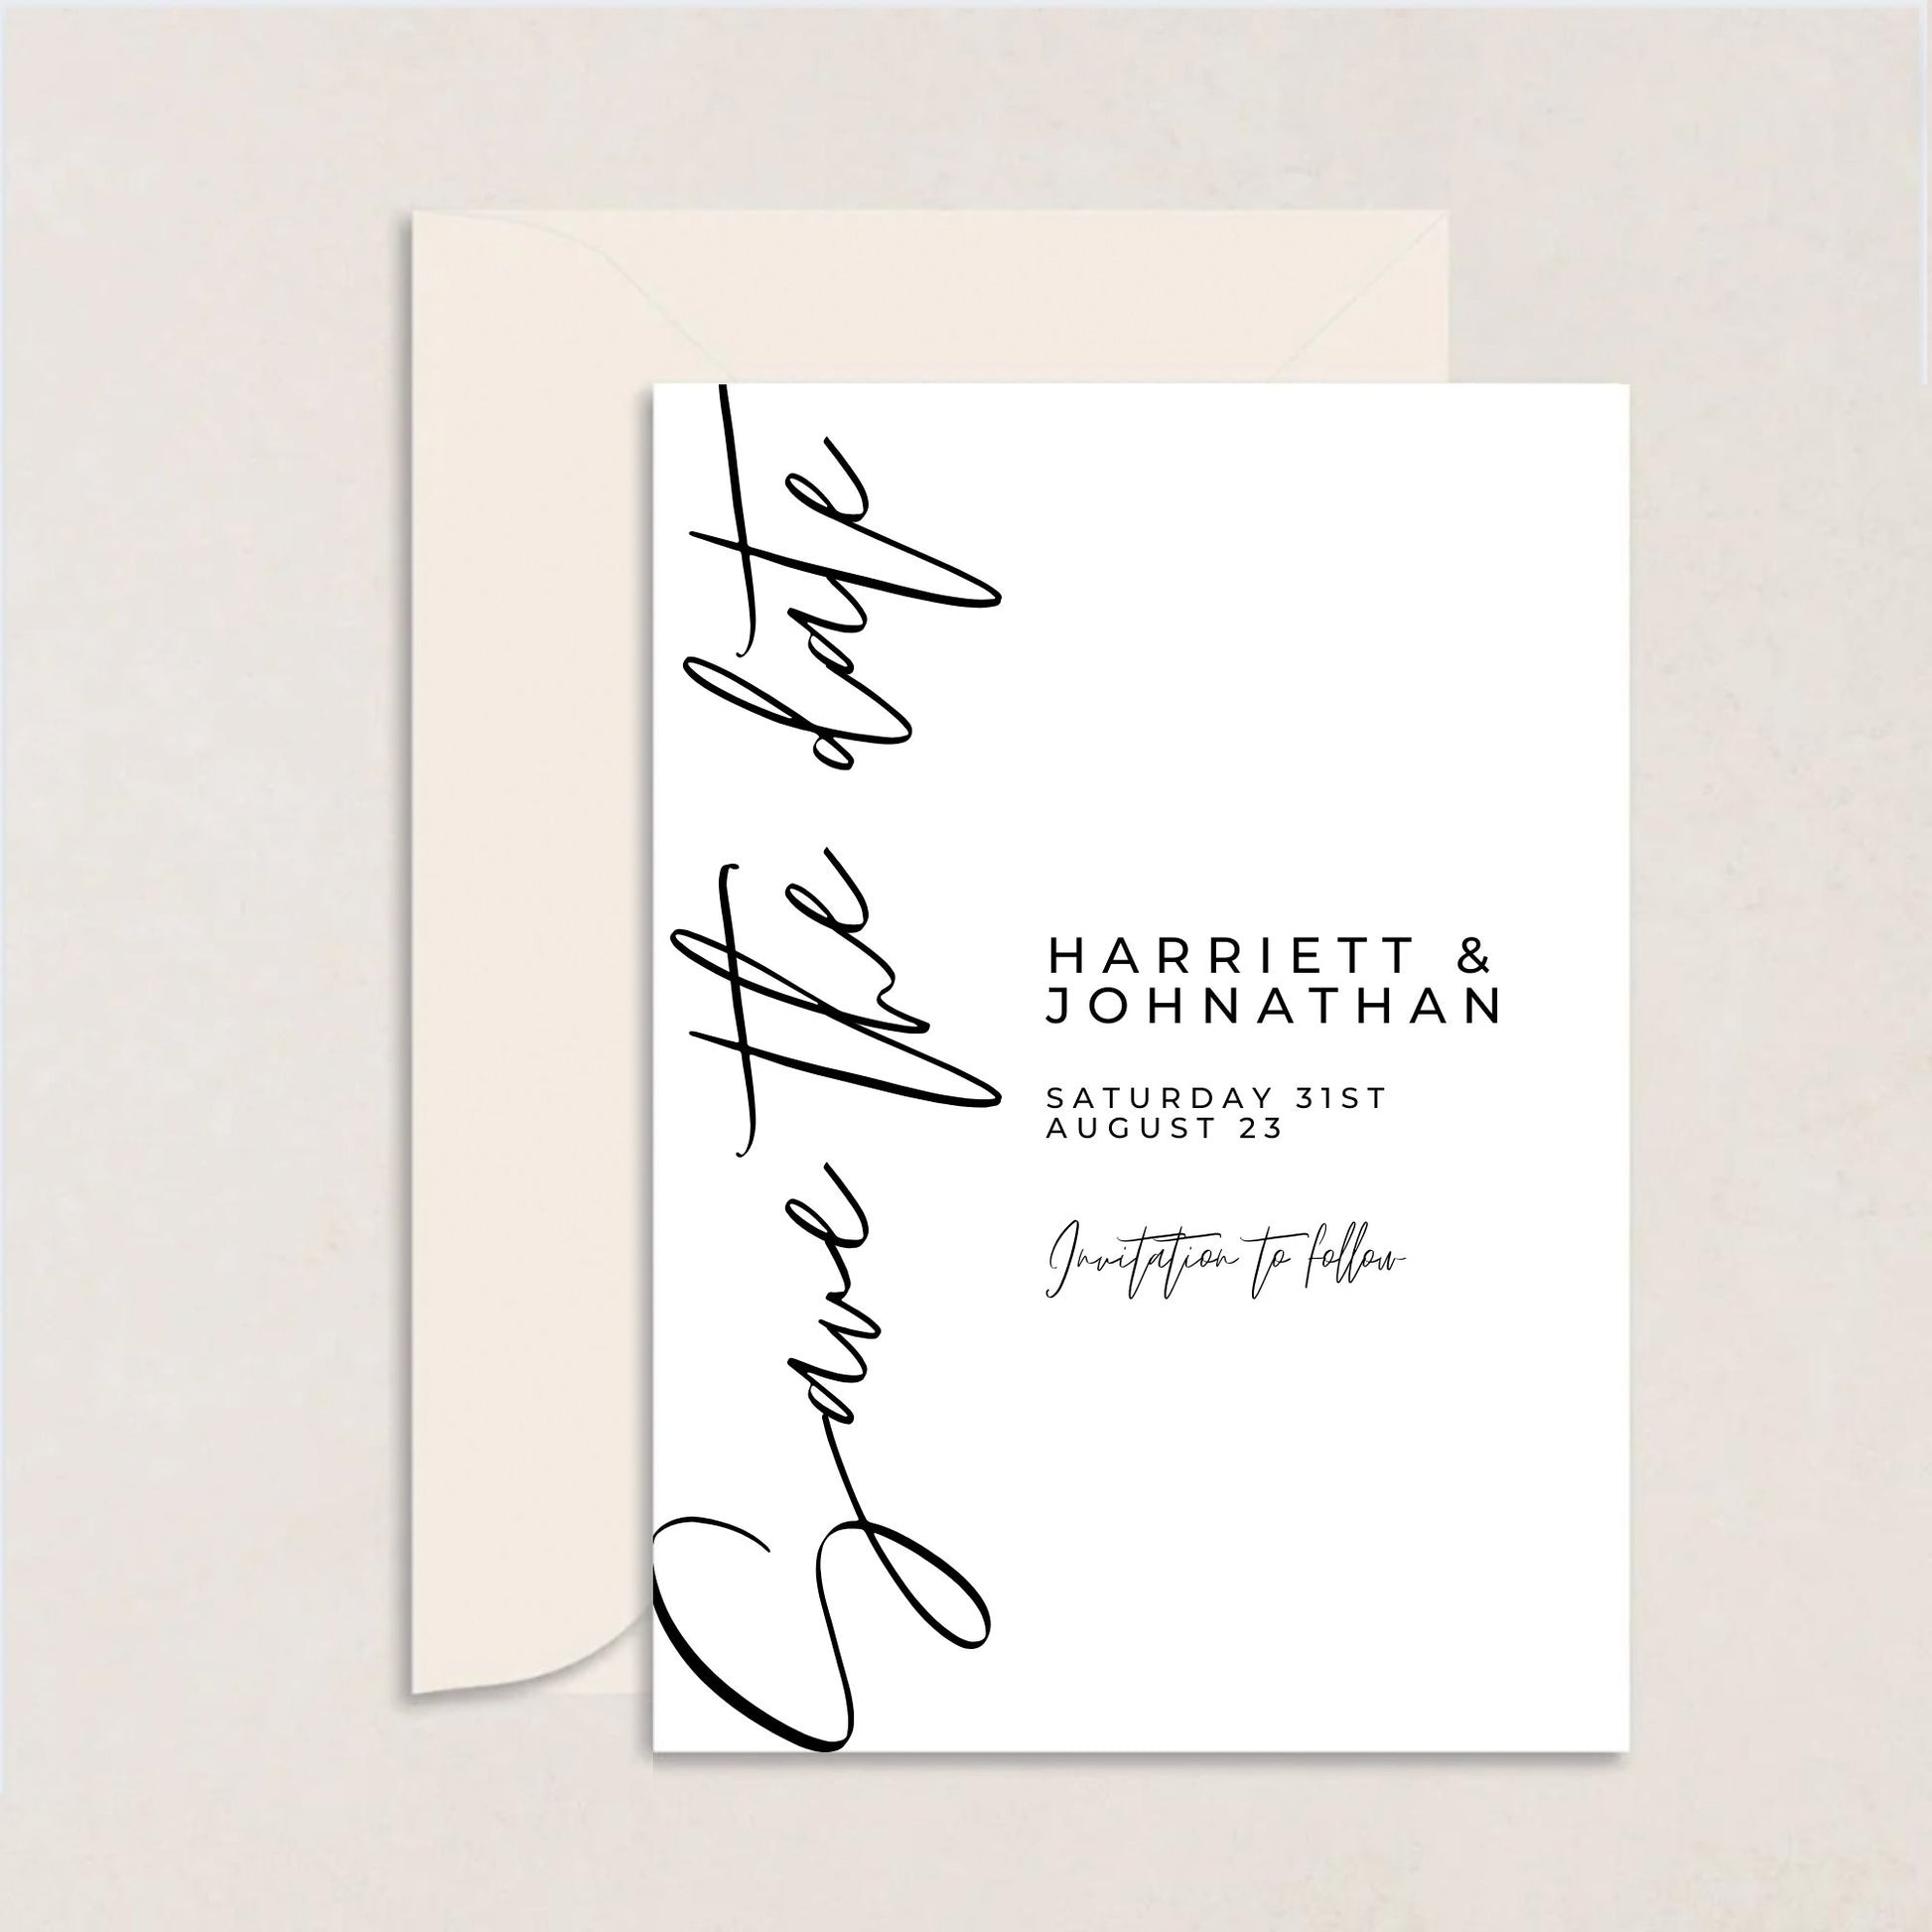 HARRIETT Wedding Save the Date - Wedding Invitations available at The Ivy Collection | Luxury Wedding Stationery